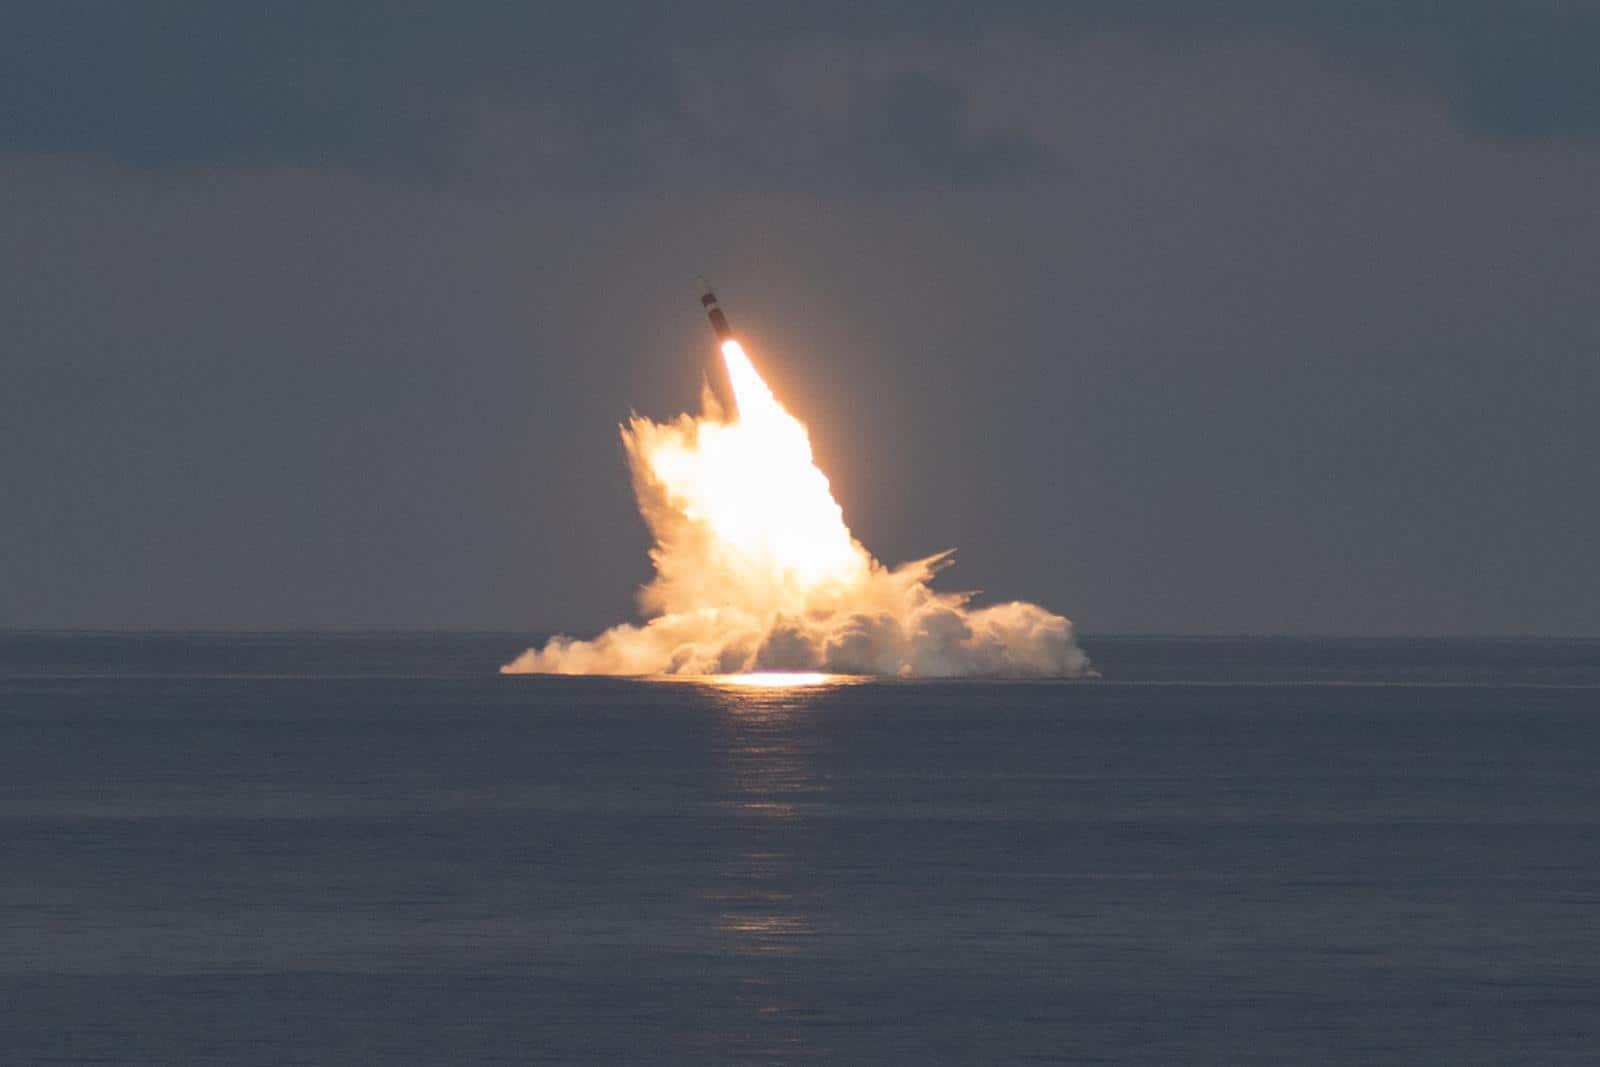 Two Trident II D5LE ballistic missiles were fired from the submarine in the form of a test